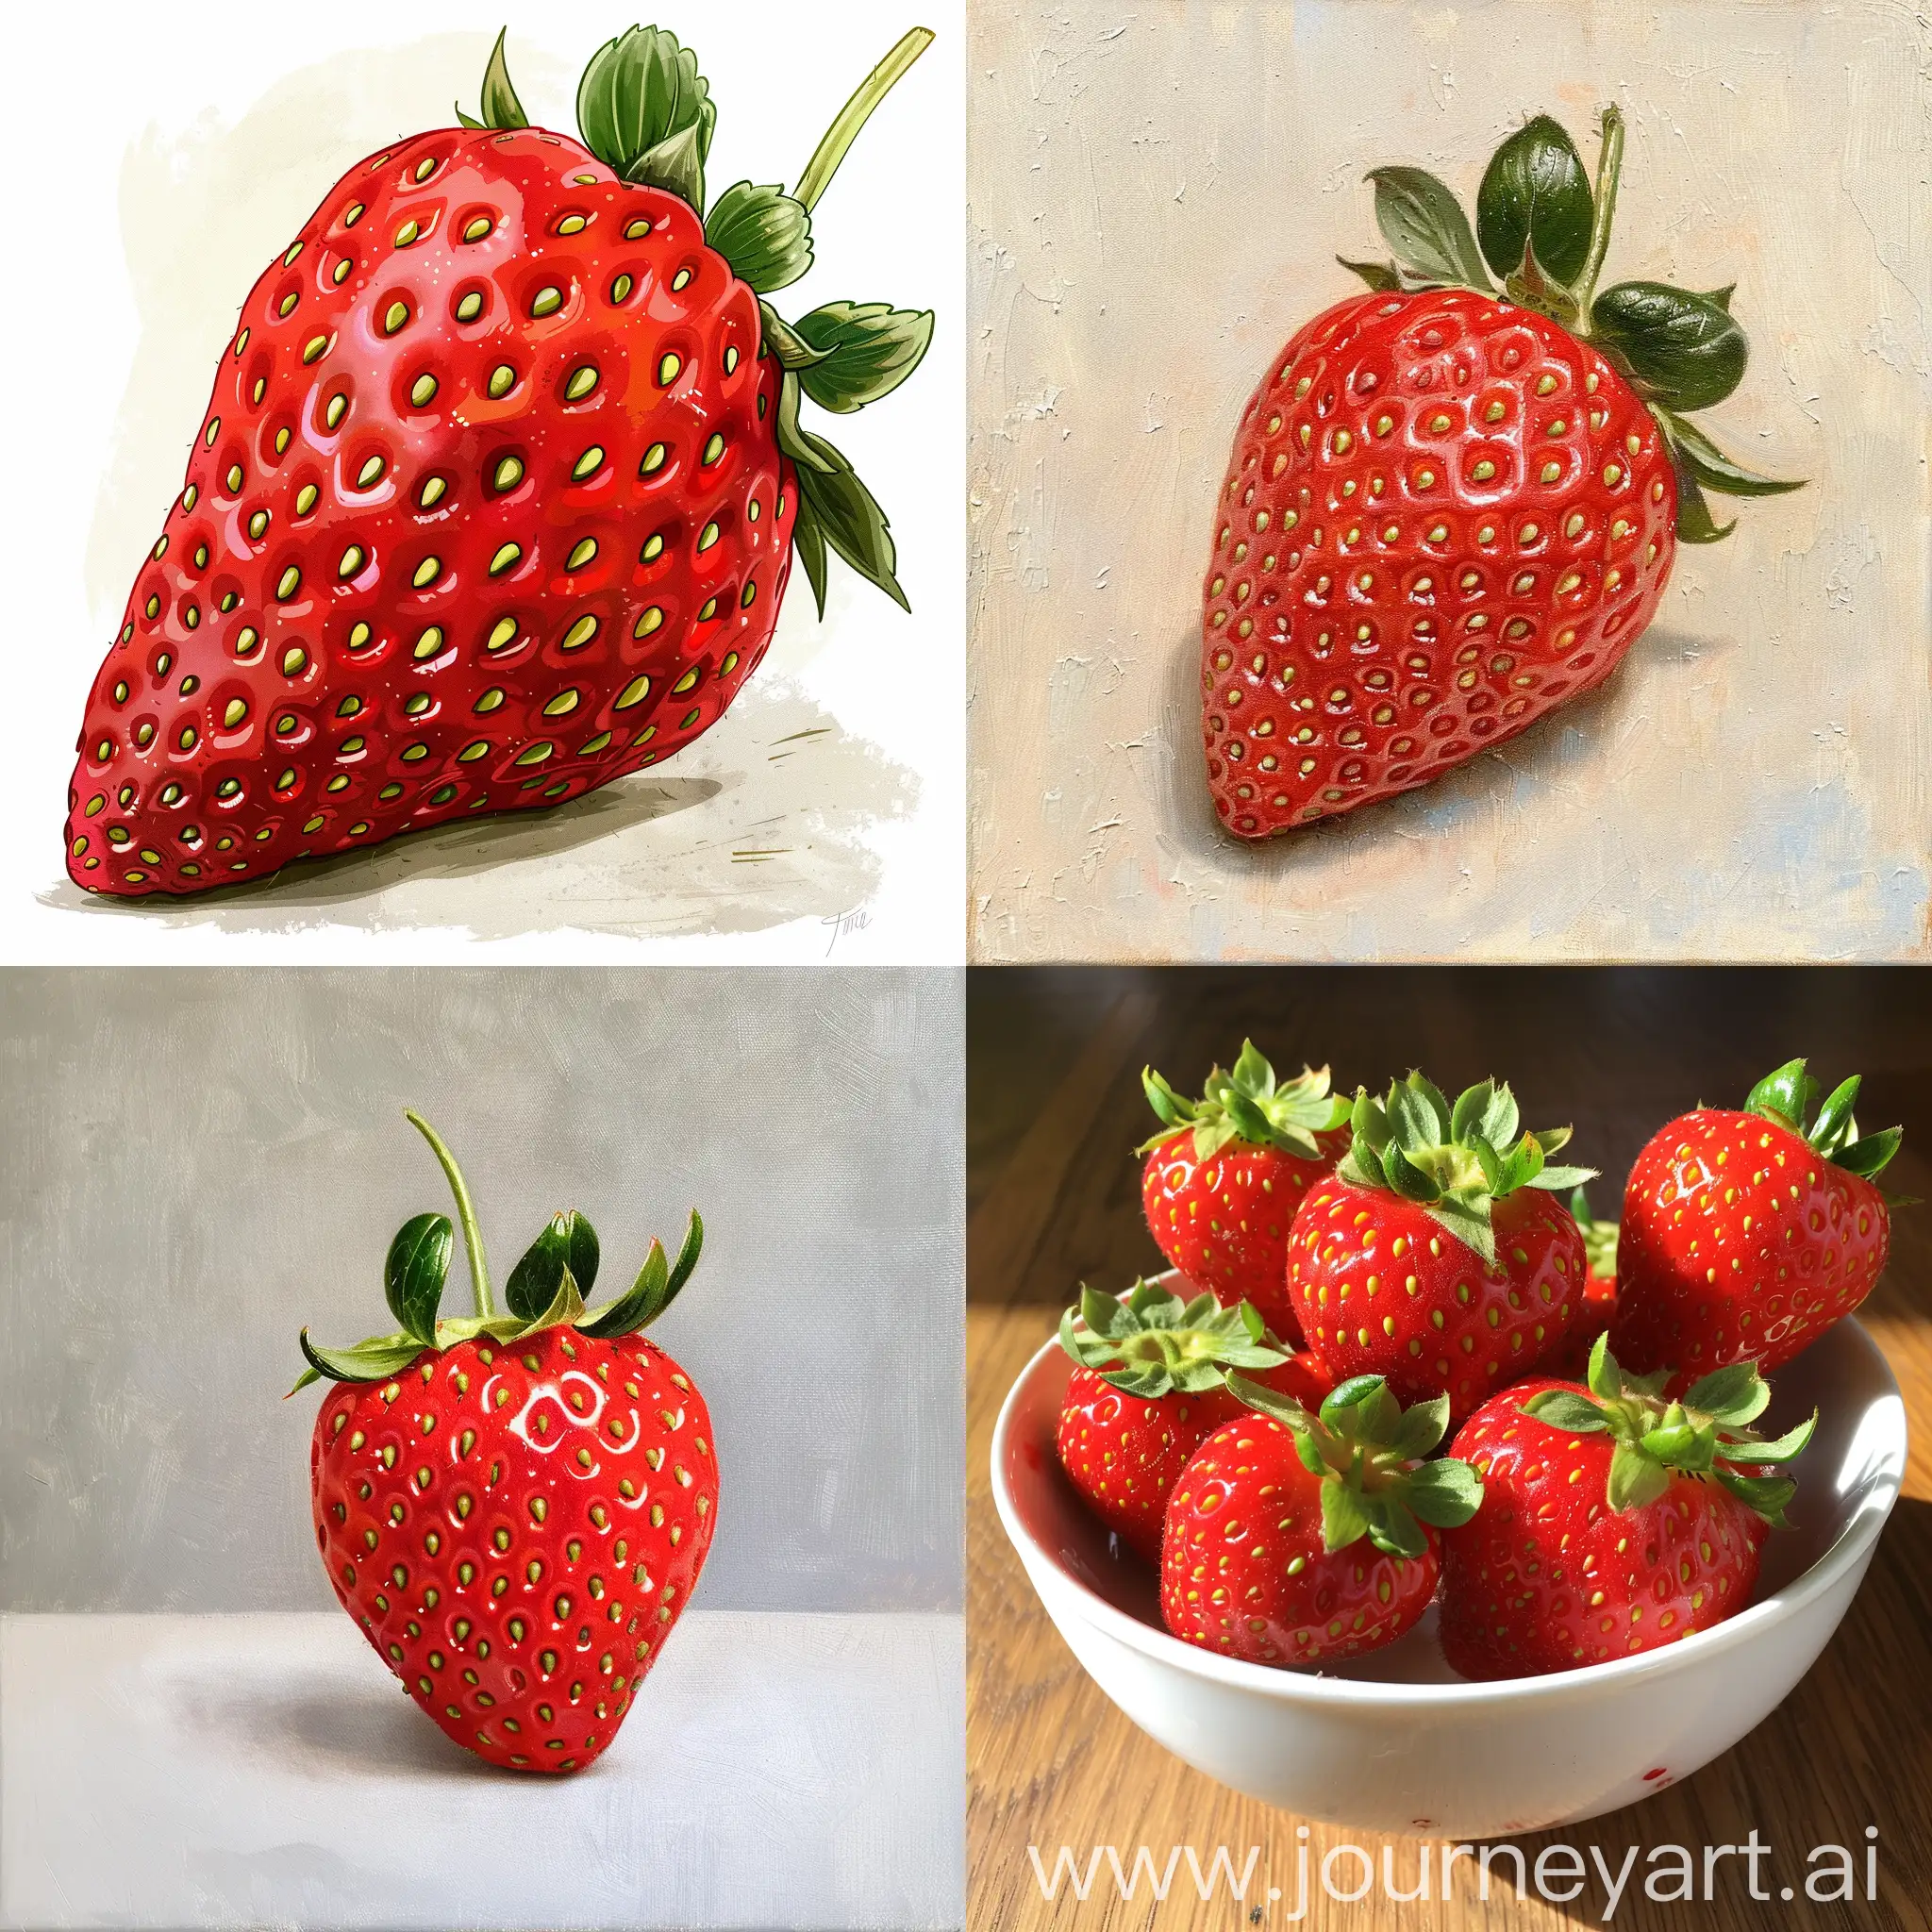 Vibrant-Strawberry-Still-Life-Composition-with-32637-Variations